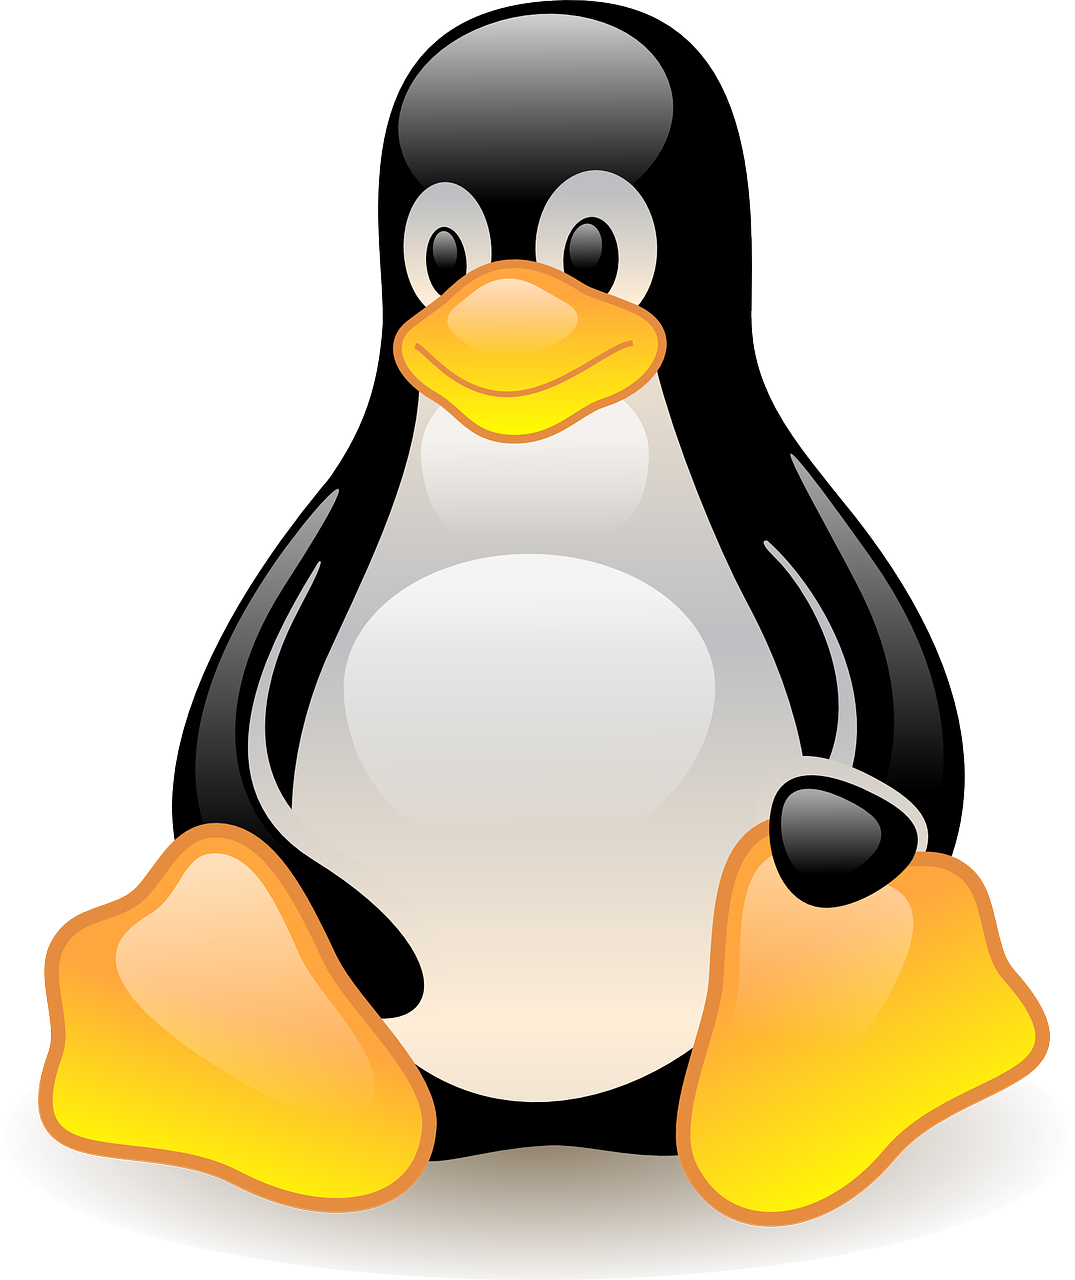 a black and white penguin sitting on the ground, an illustration of, pixabay, computer art, cpu, onyx, creamy, honey